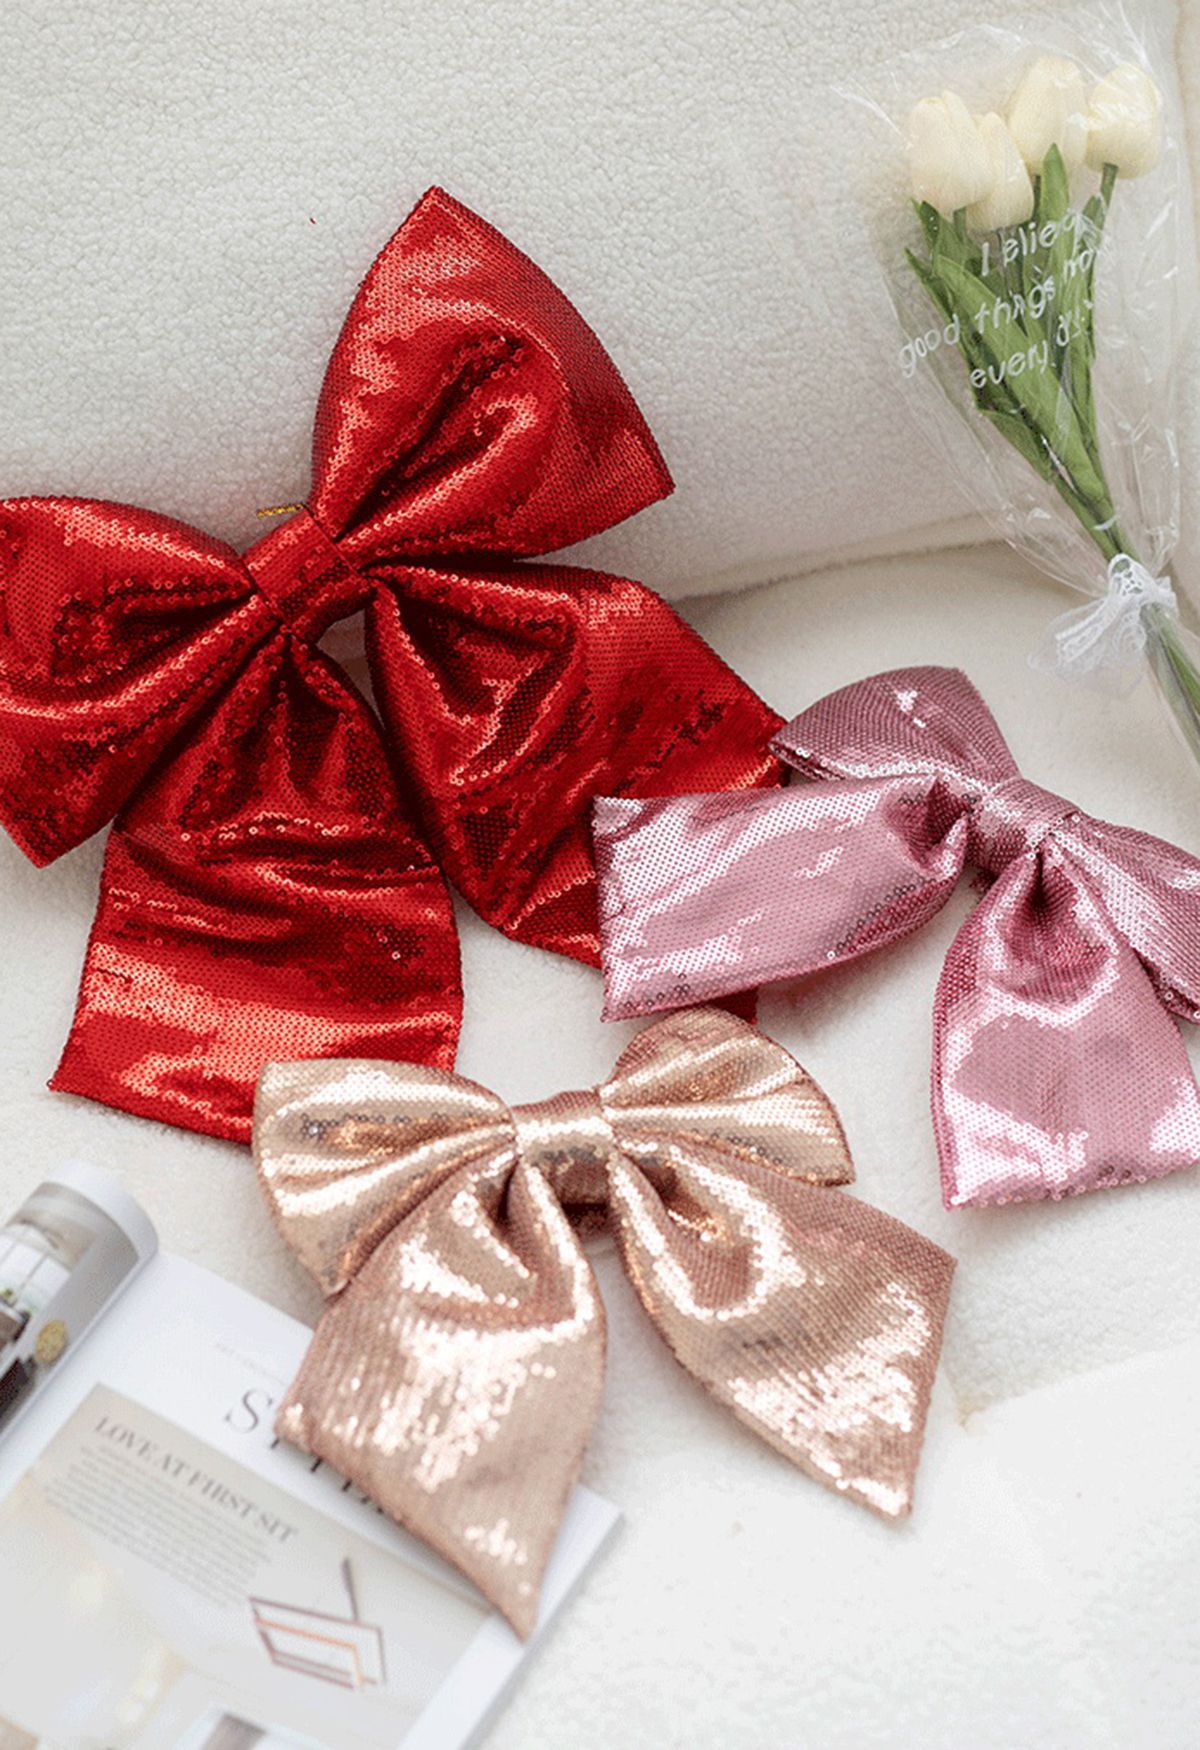 Full Sequins Bowknot Christmas Ornament in Pink